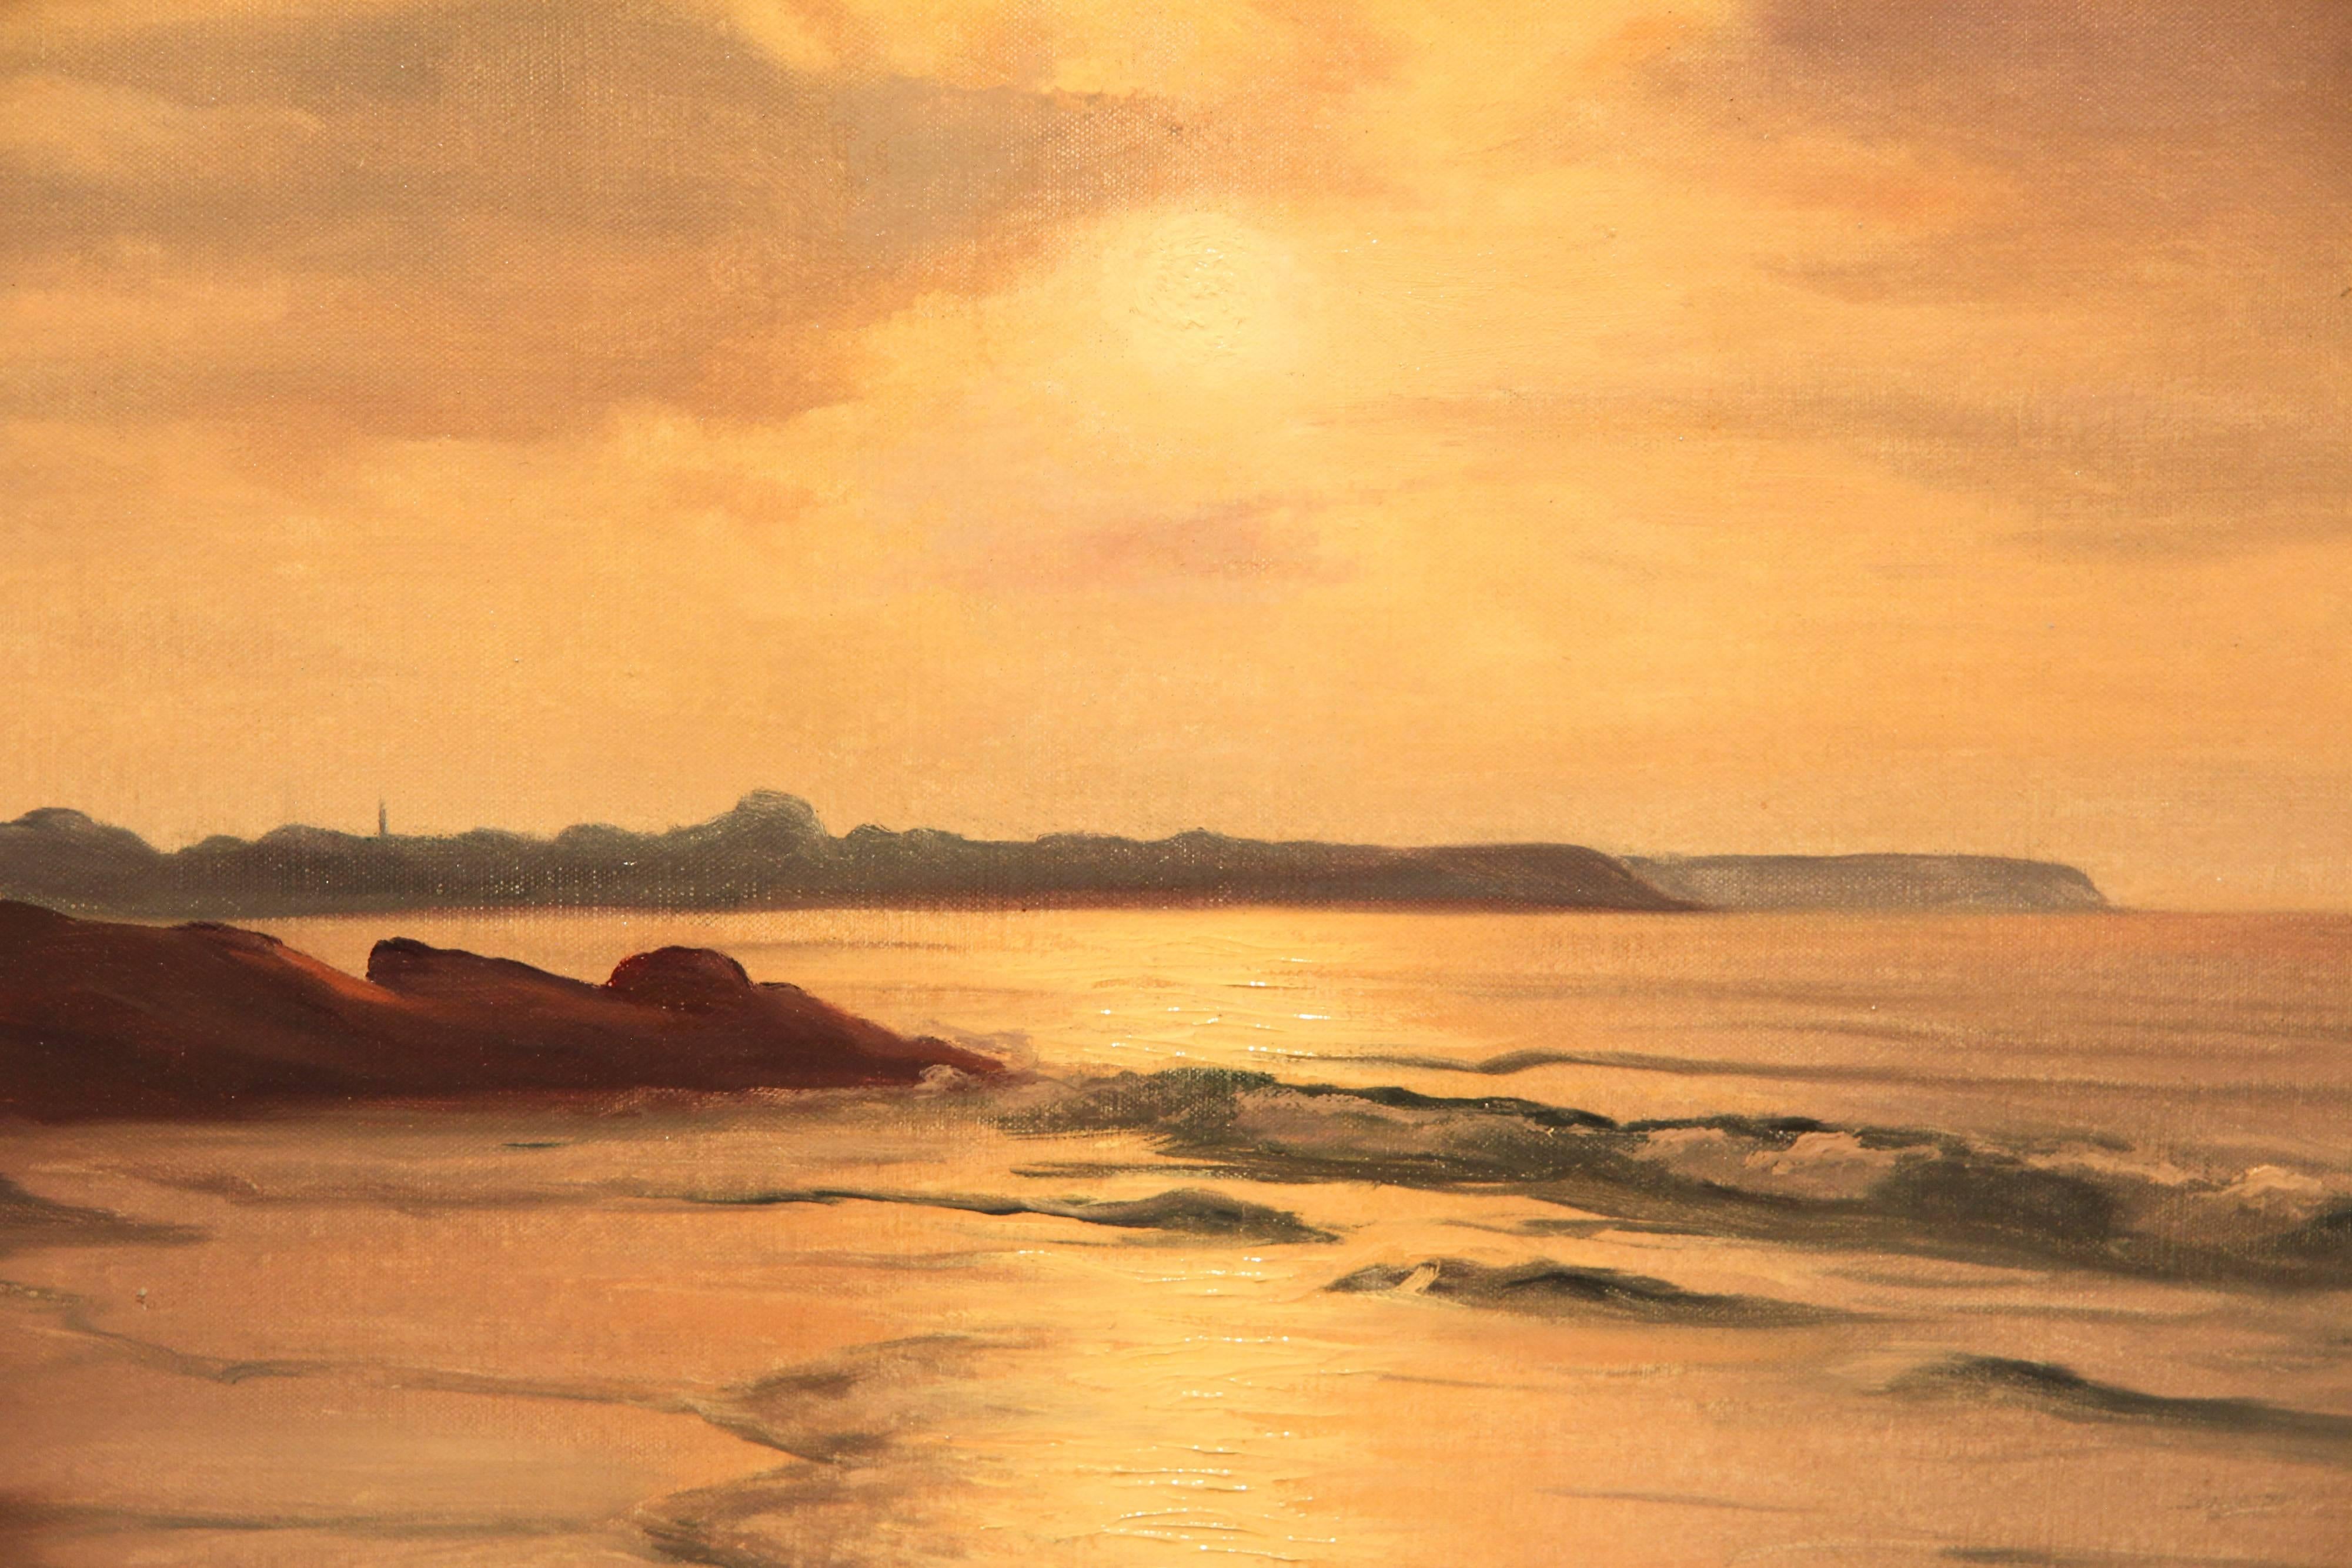 Brittany coast sunset by Roger de la Corbiere, 1930-1960. Oil on canvas, signed. 18x22".

All of the items that we advertise for sale have been as accurately described as possible and are in excellent condition, unless otherwise stated.